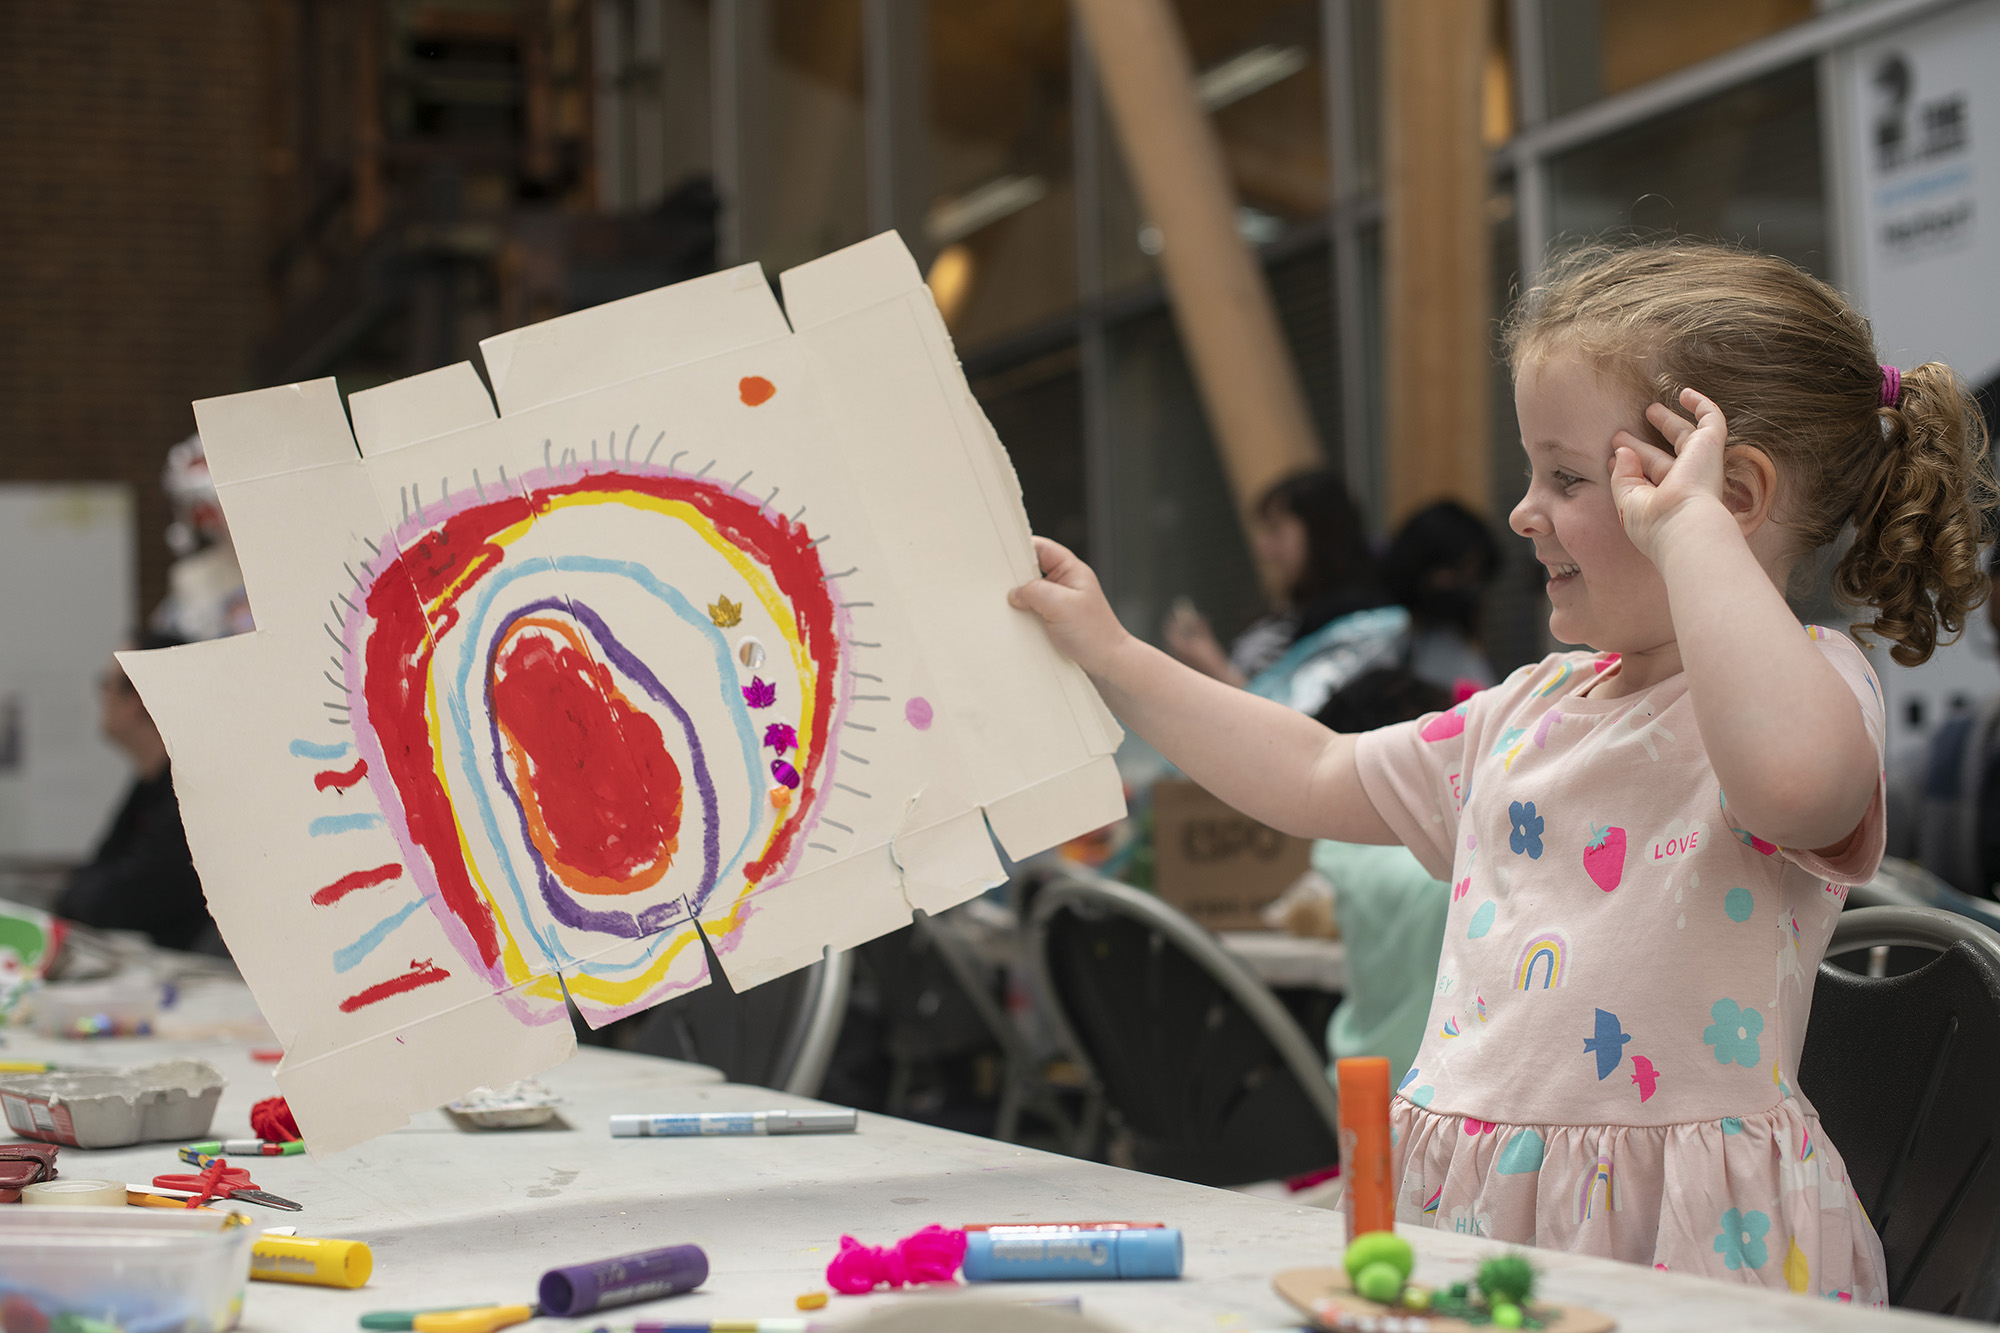 A photo of a girl holding up a piece of cardboard with a colourful design she has drawn on it